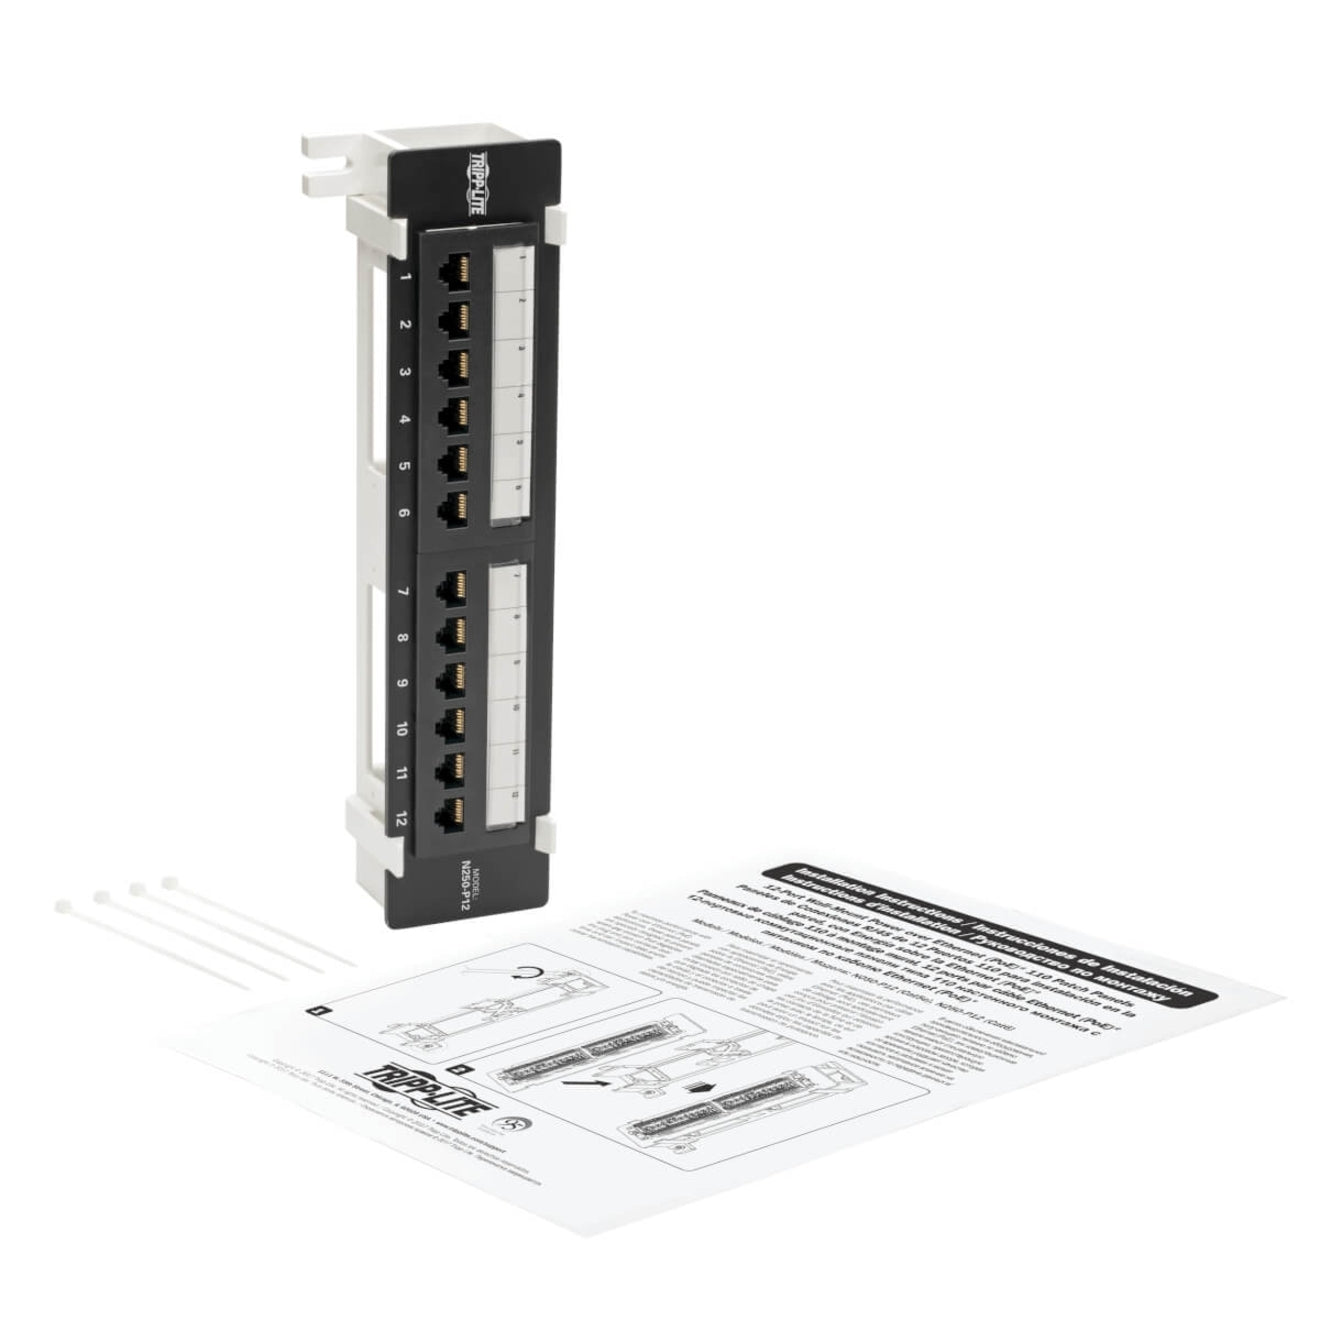 Tripp Lite N250-P12 12-Port Wall-Mount Cat6 Patch Panel - PoE+ Compliant, Easy Network Cable Management